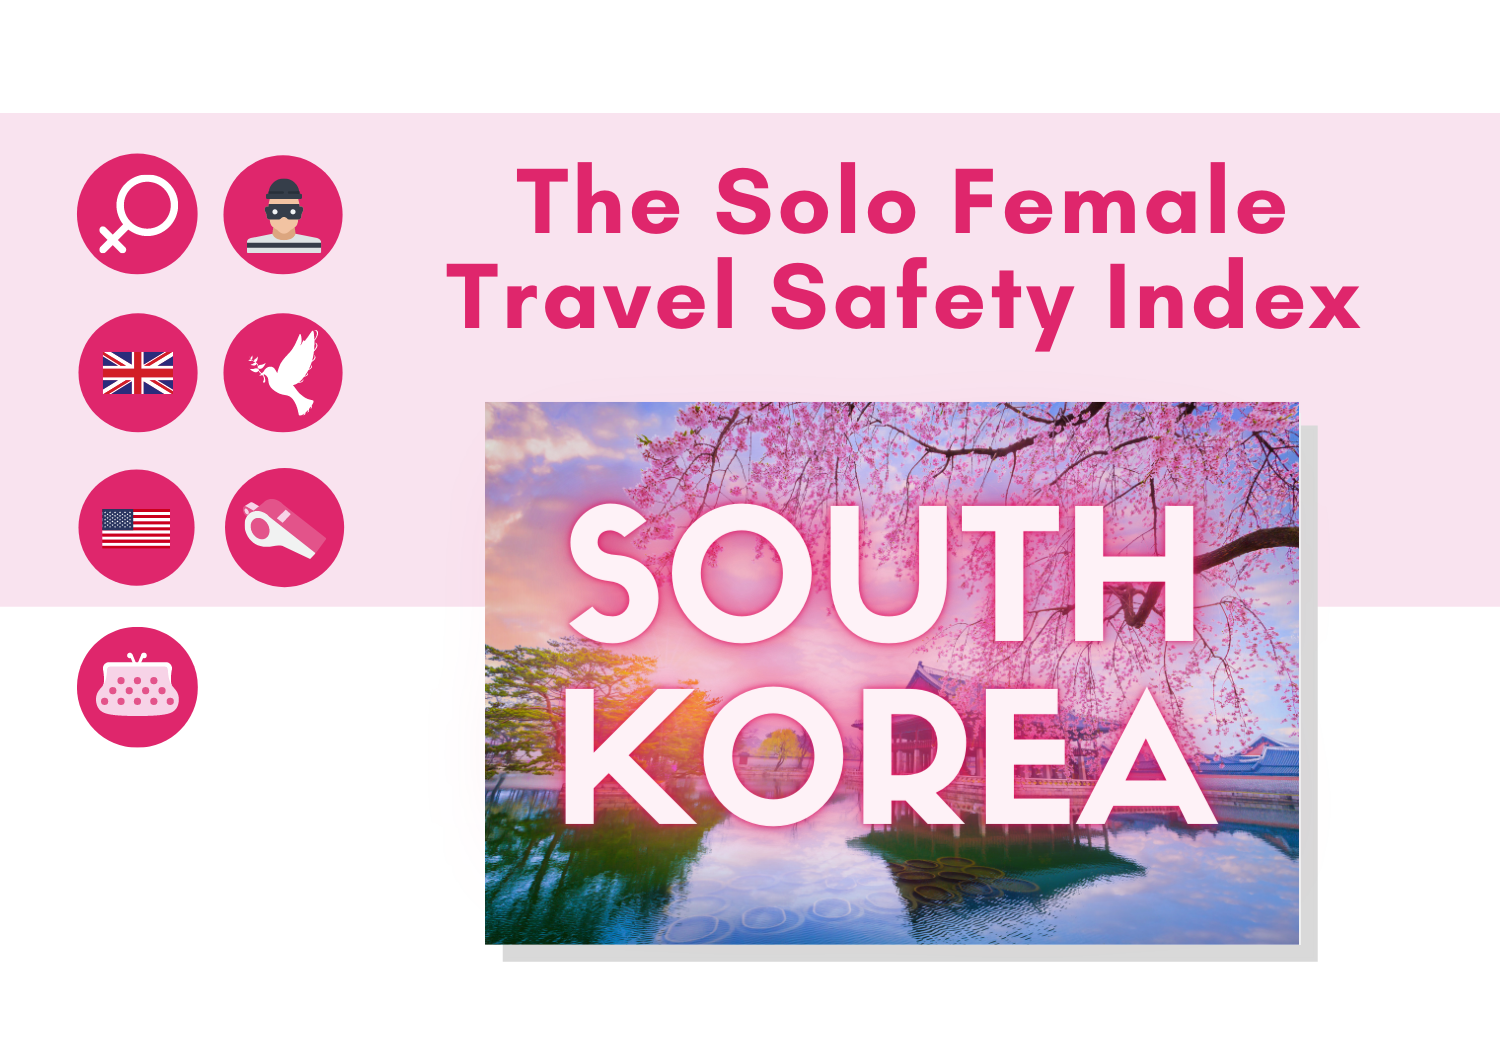 Solo female travel safety in South Korea